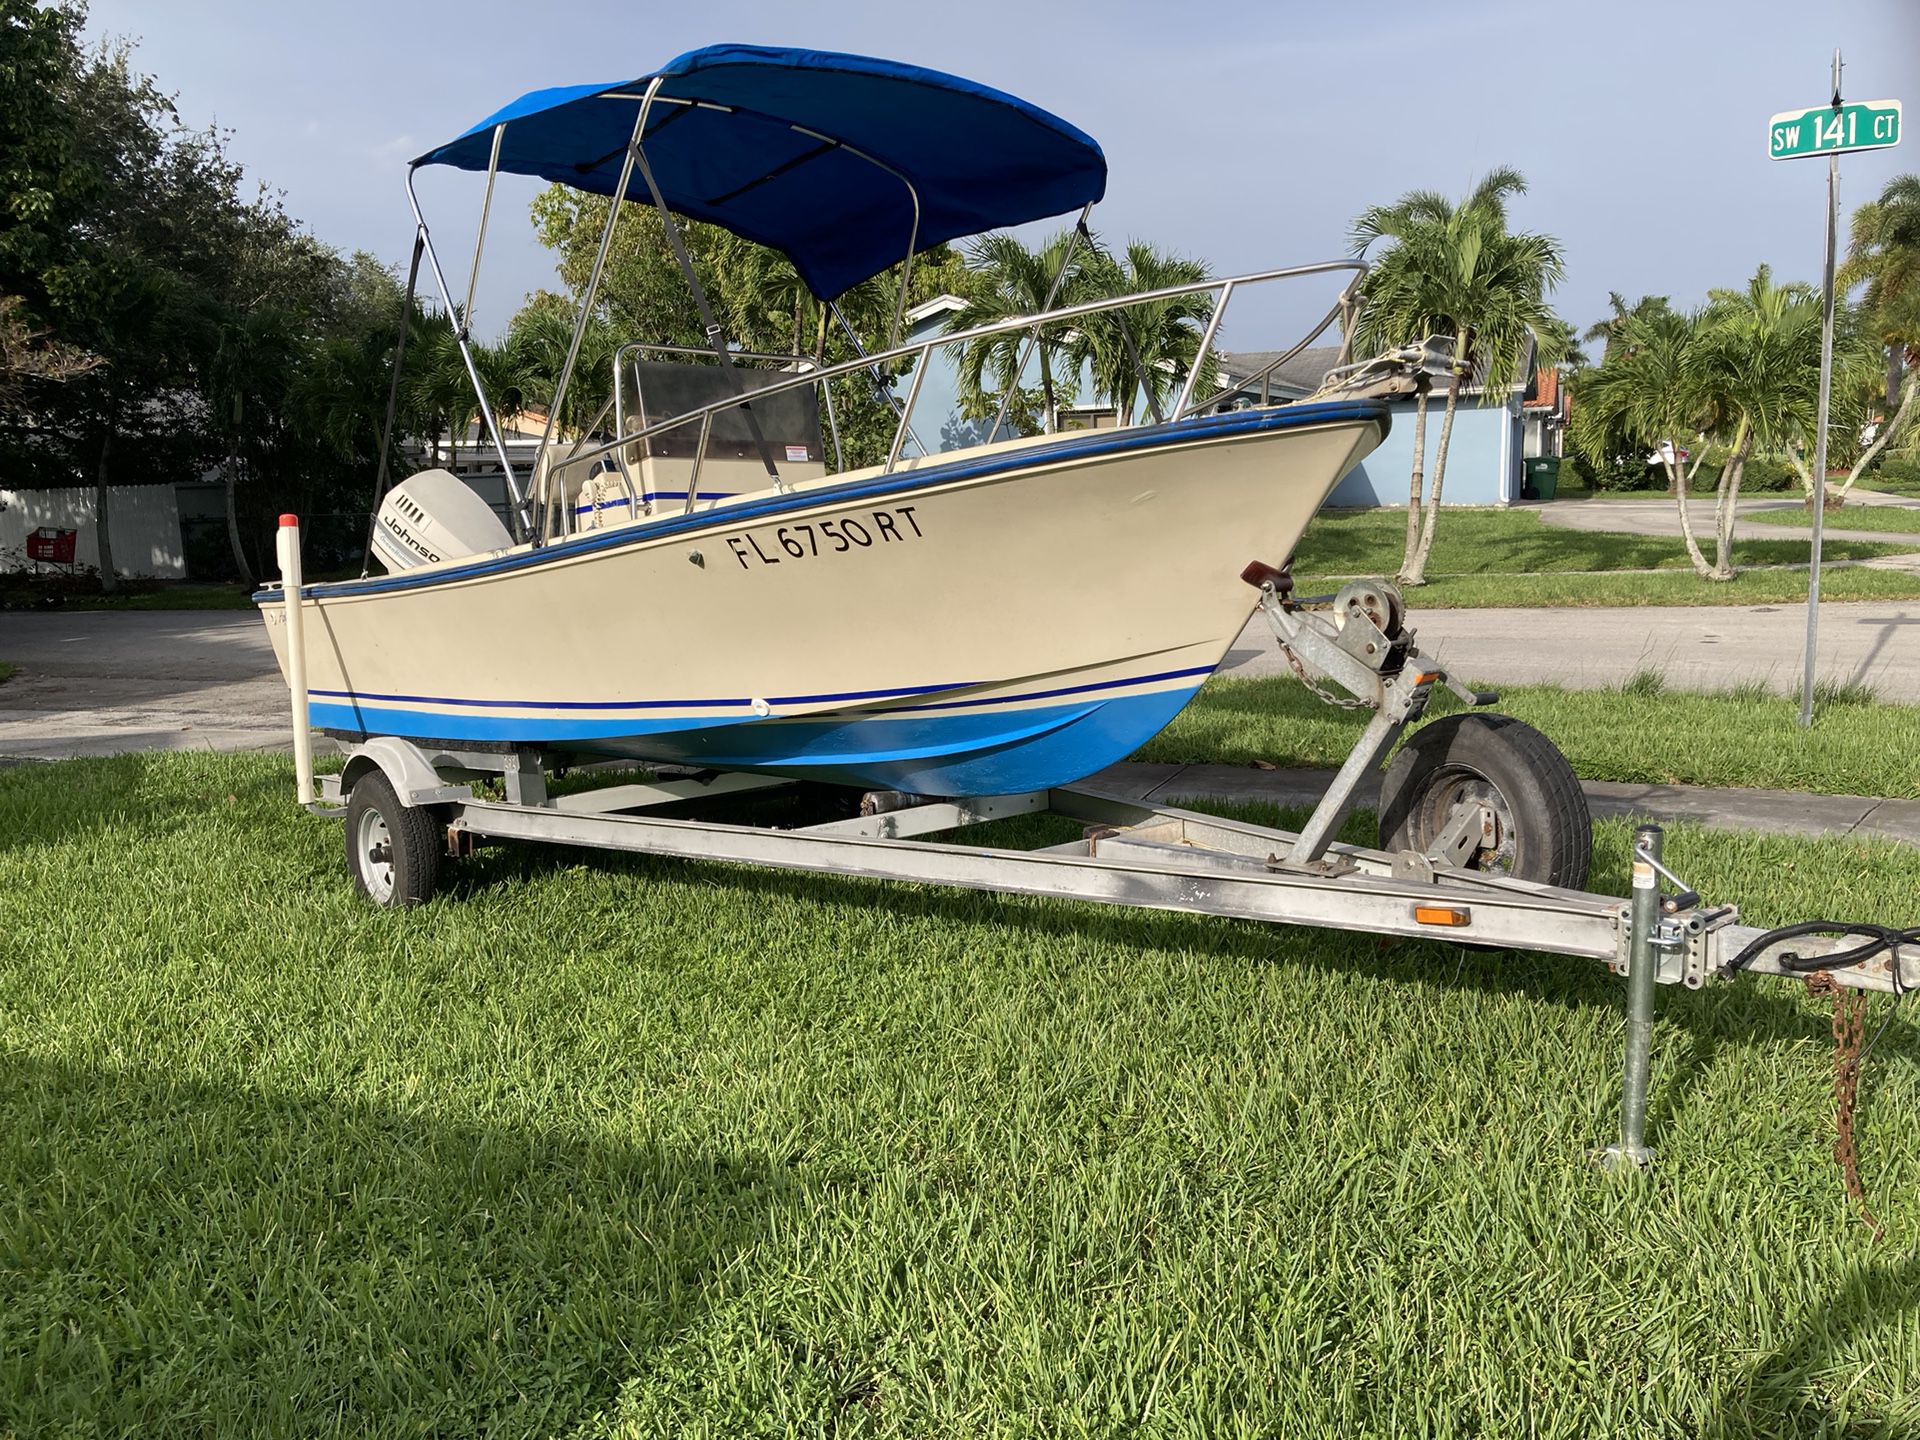 Aqua Sport 17’ With Johnson 90 HP,27 Gallons Gas Tank,aluminum Trailer, With New Lights,Bimini Top, Ready To Fish, Kendall West Area 